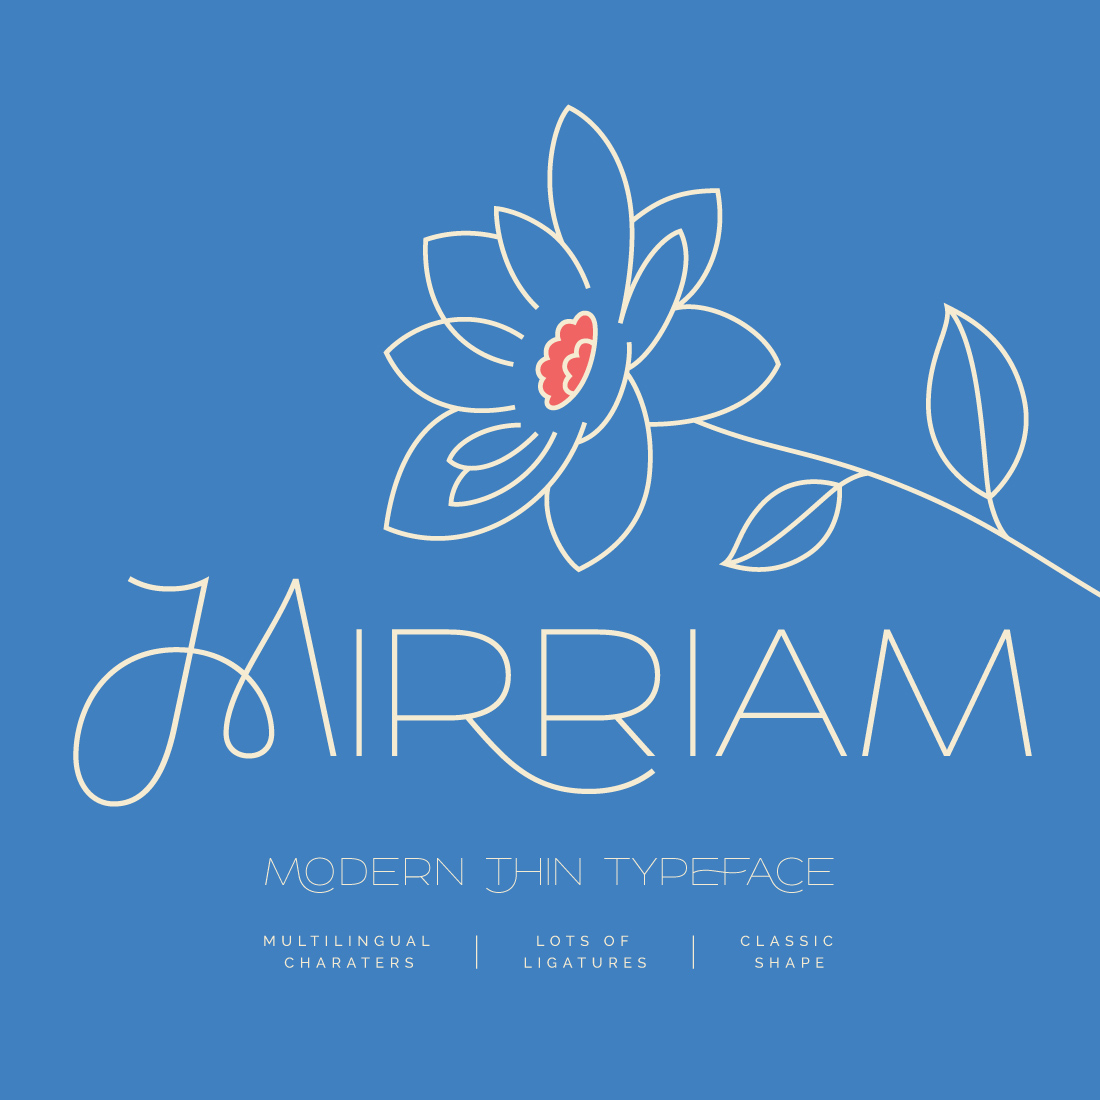 Mirriam — Modern Thin Typeface cover image.